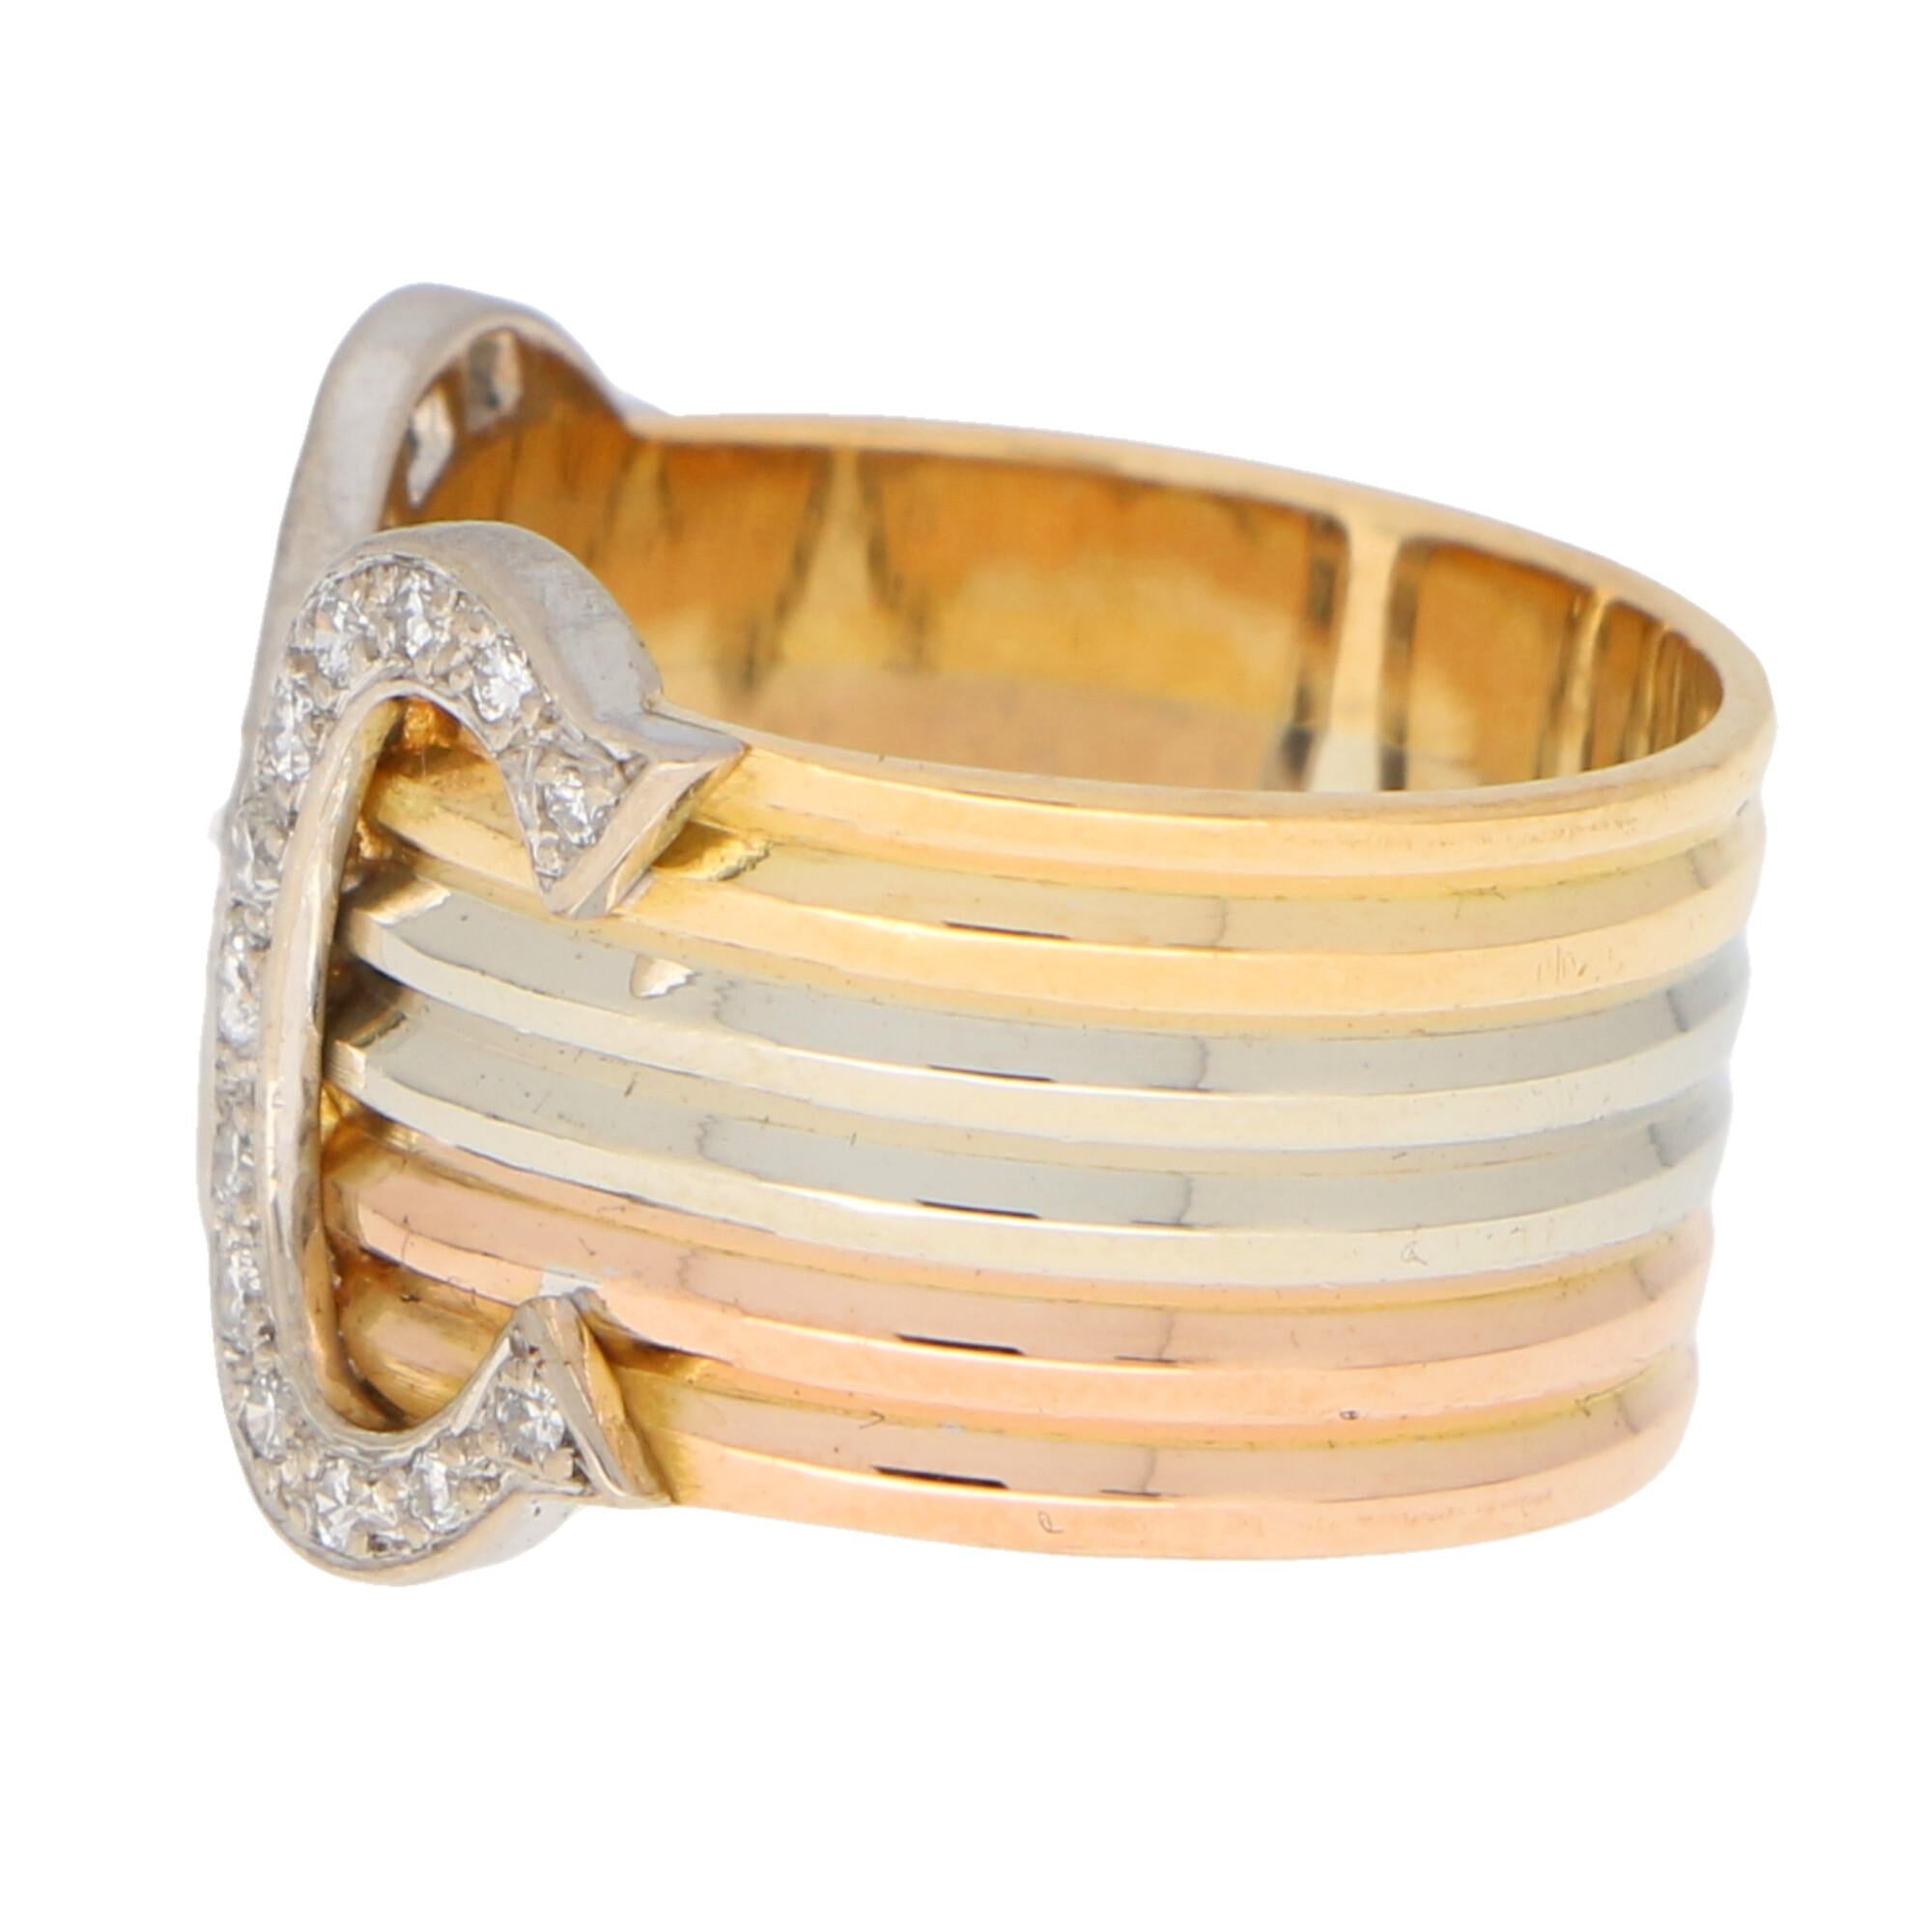 Retro C de Cartier Diamond Trinity Band Ring Set in 18k Yellow, White and Rose Gold